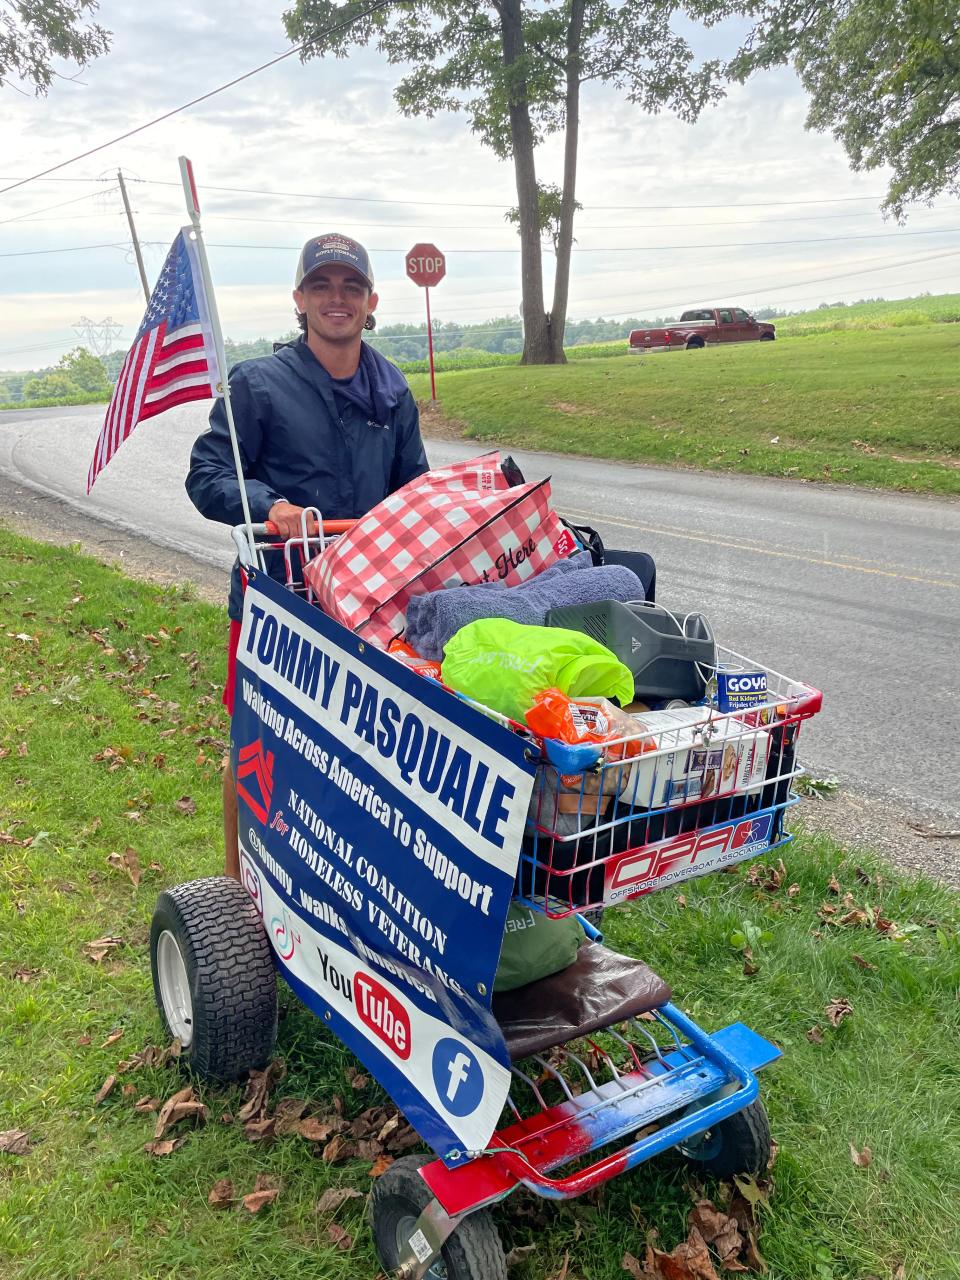 Tommy Pasquale of New Jersey is pushing a shopping cart 3,000 miles across the U.S. to raise money and awareness for homeless veterans.